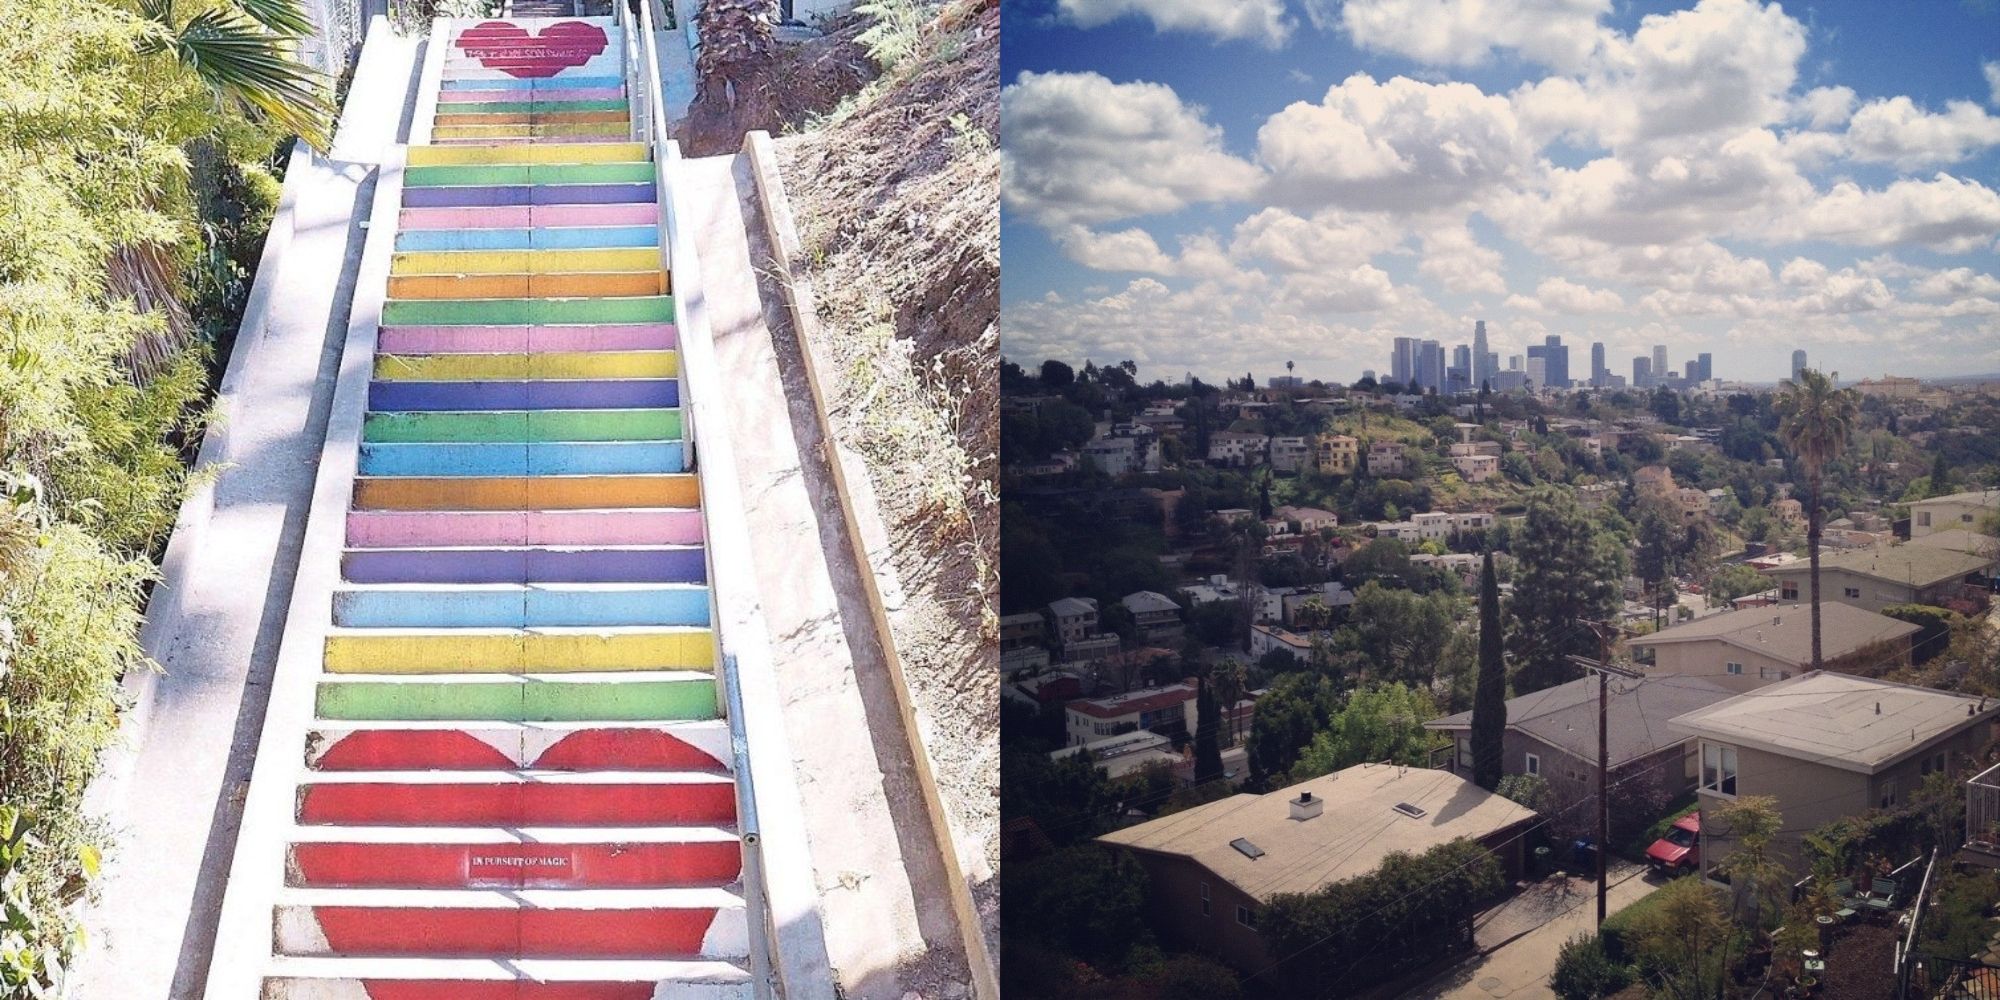 silver lake stair hike and view of LA